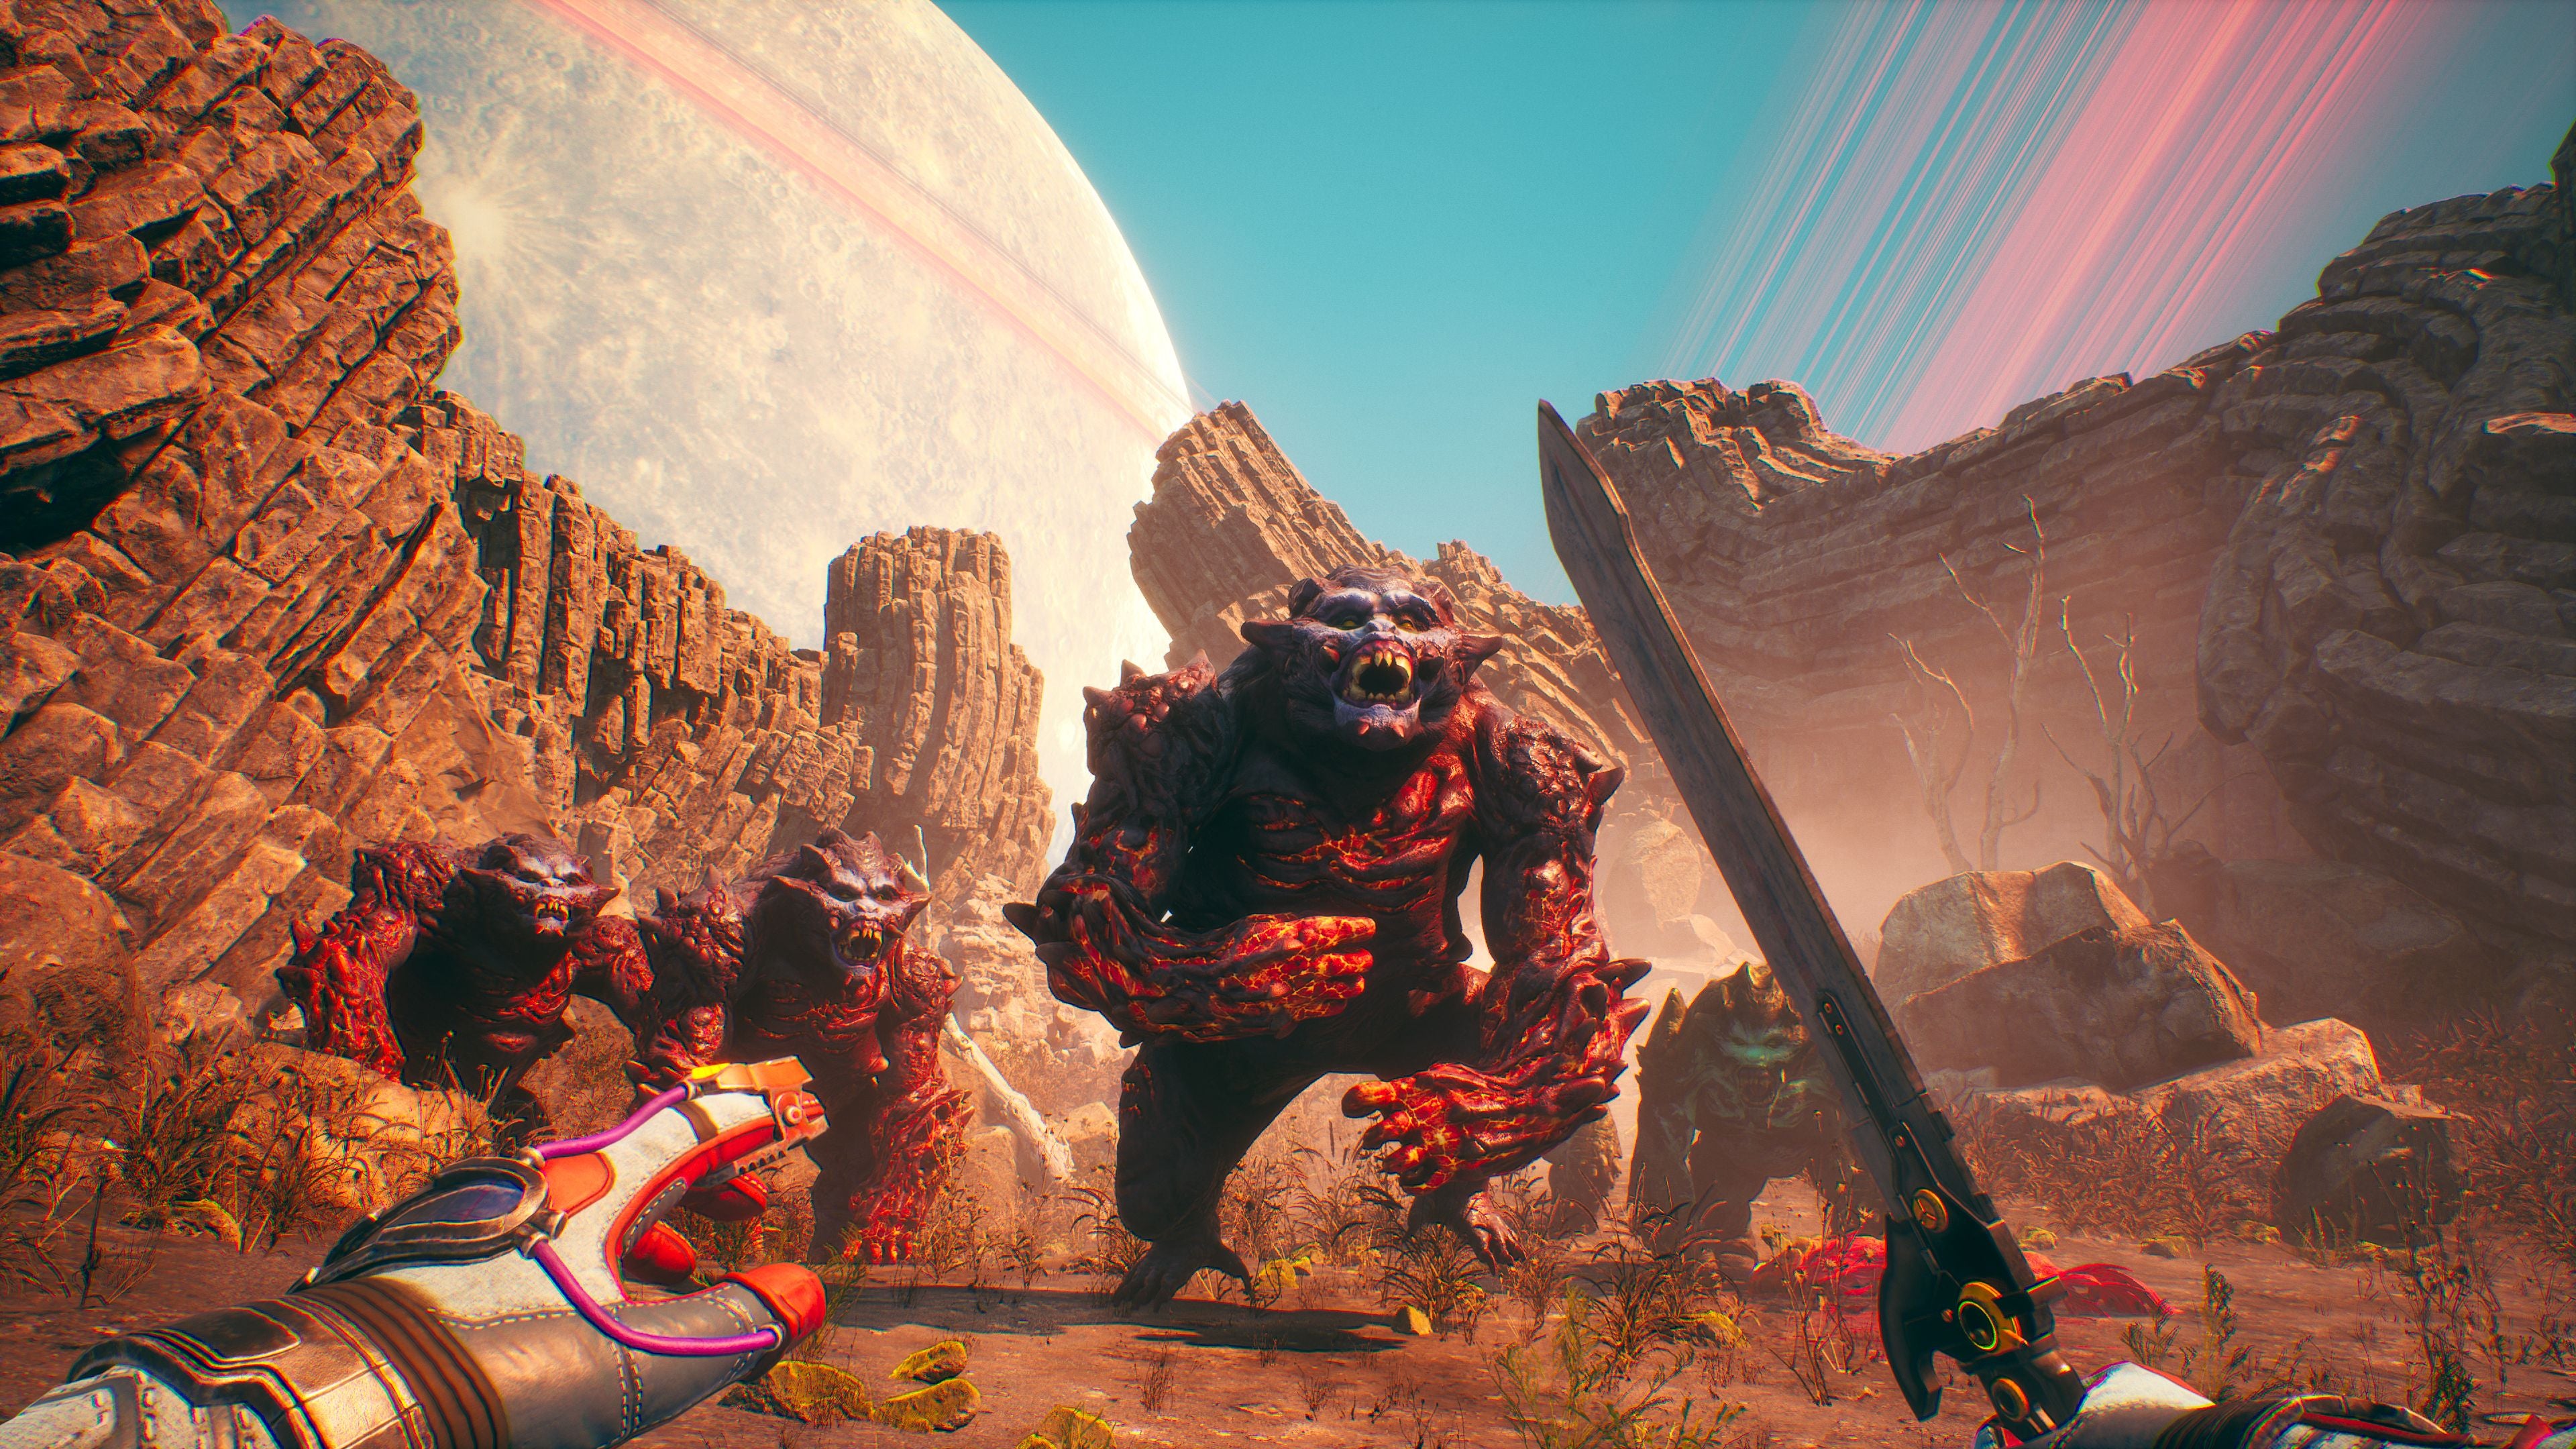 A giant ape made of lava runs at the player character in a rocky landscape in The Outer Worlds: Spacer's Choice Edition